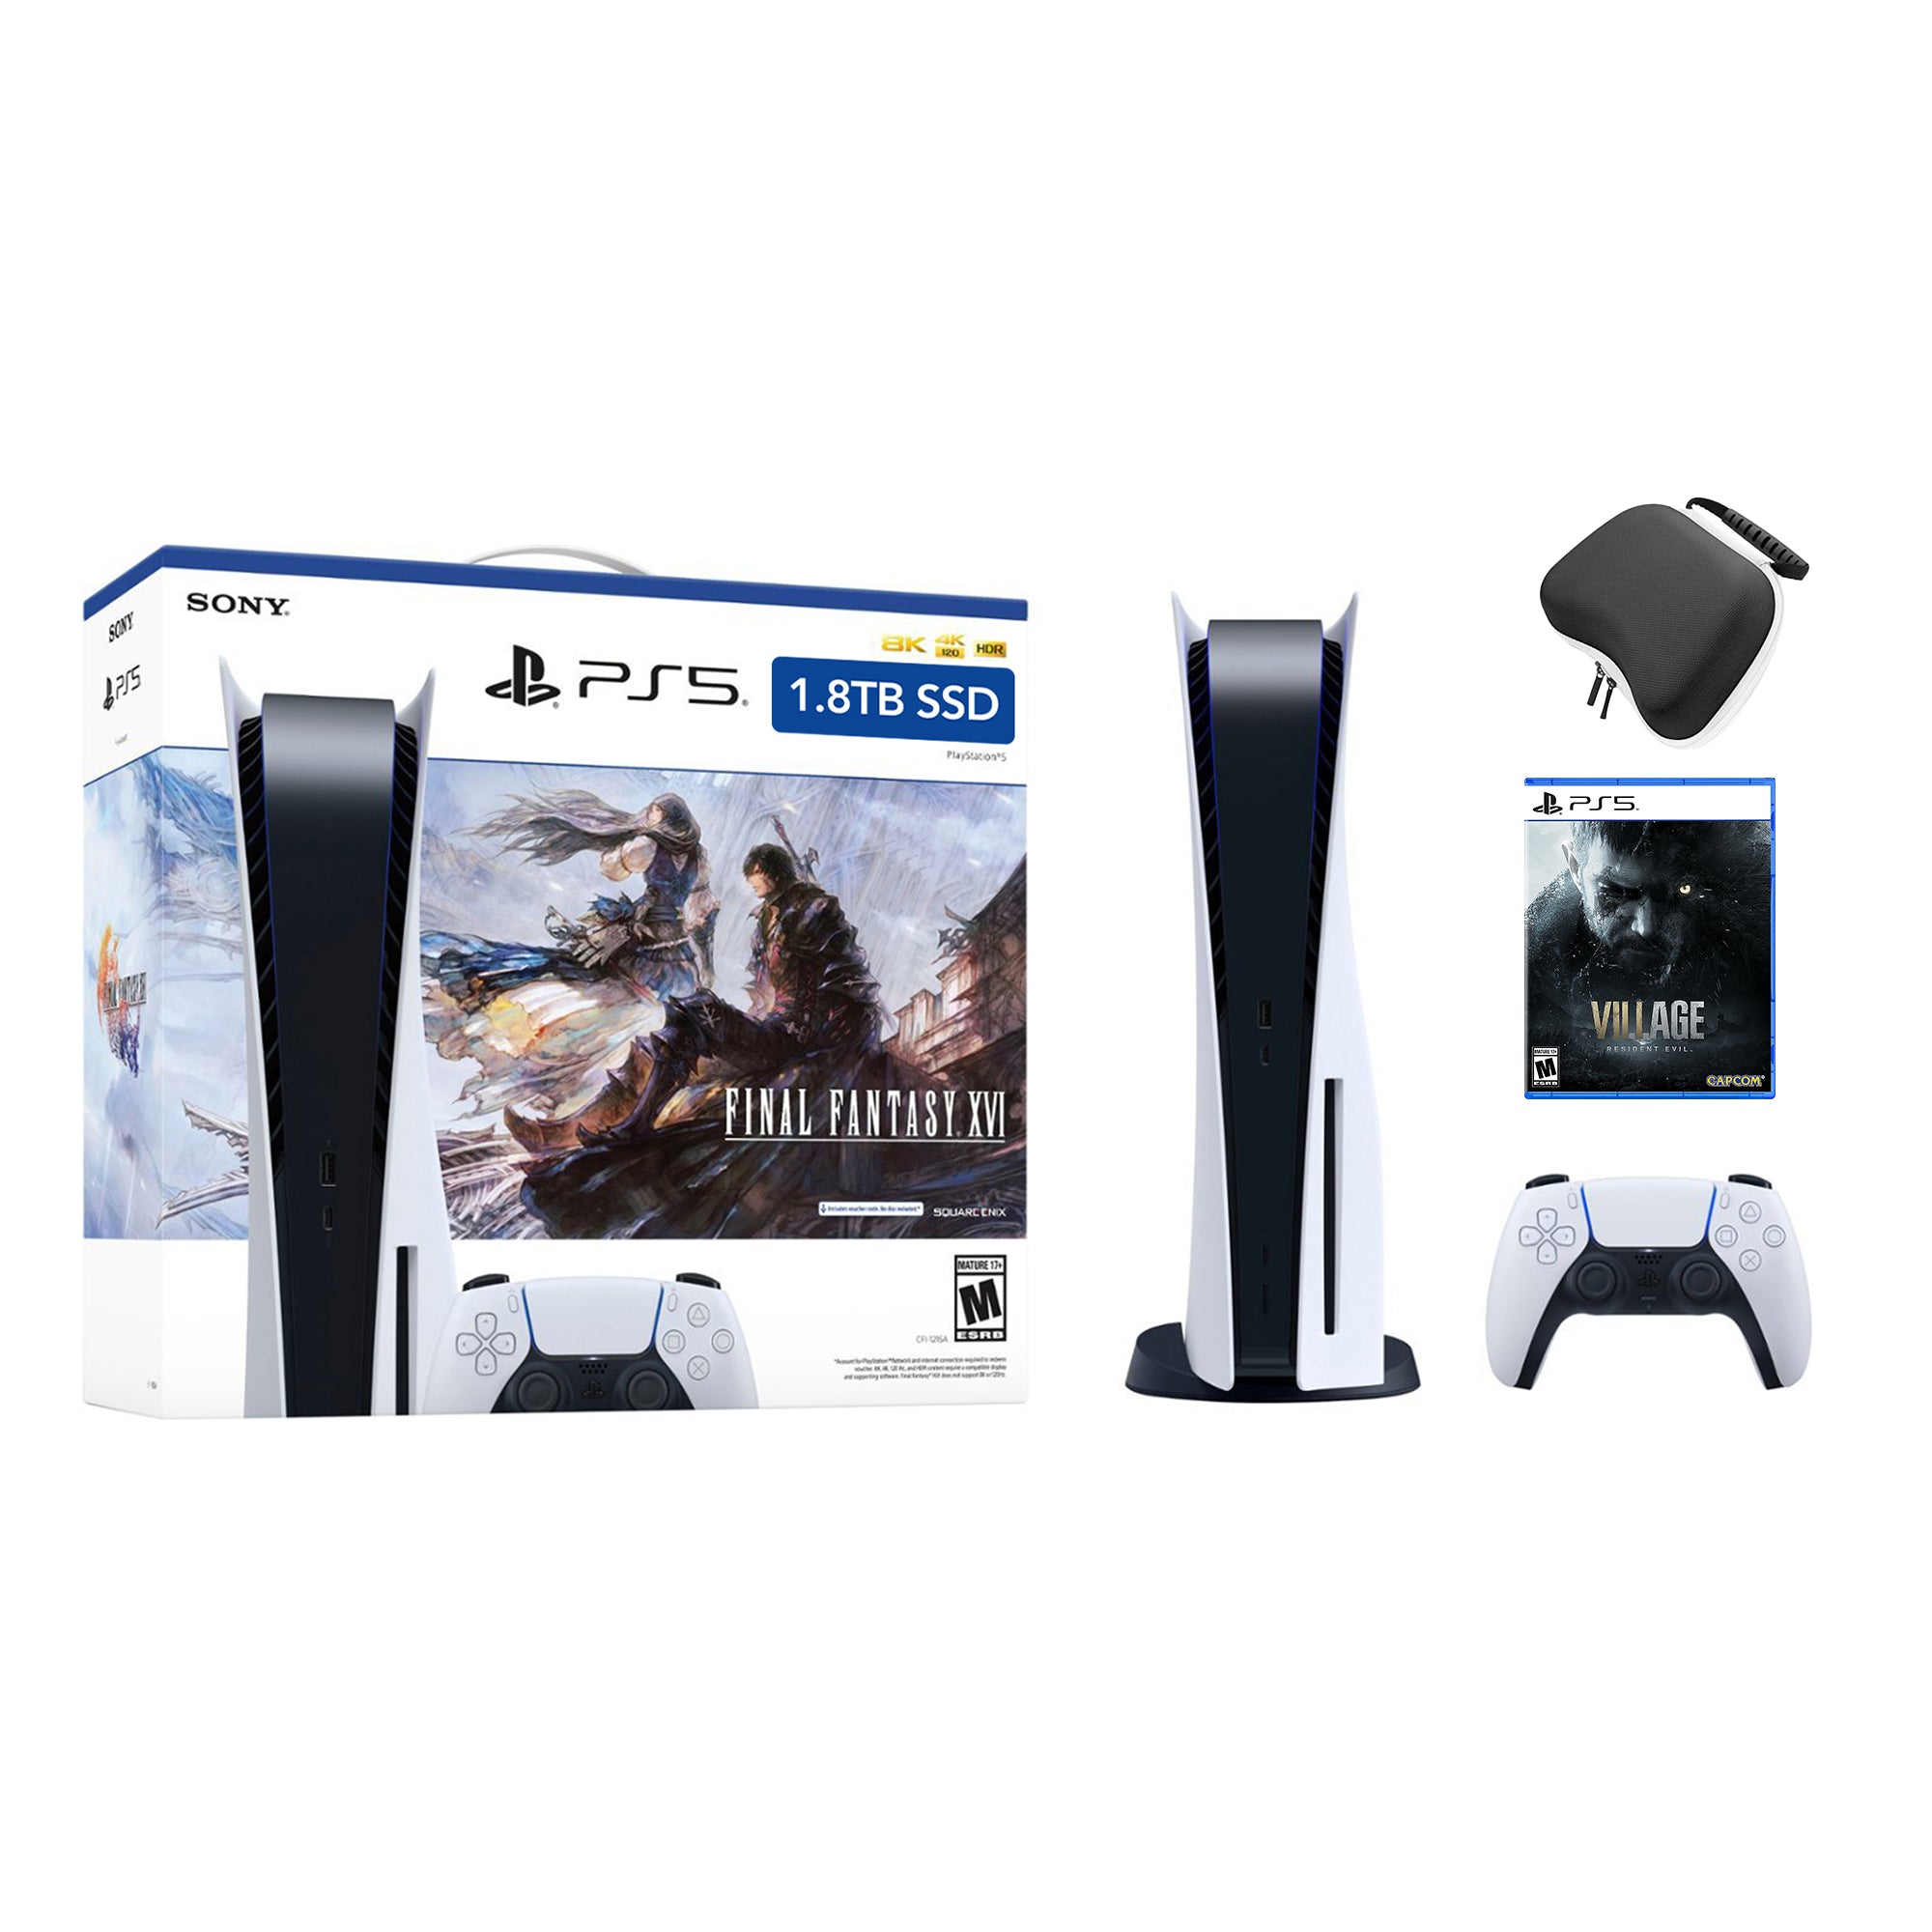 PlayStation 5 Upgraded 1.8TB Disc Edition FINAL FANTASY XVI Bundle with Resident Evil Village and Mytrix Controller Case - PS5, White